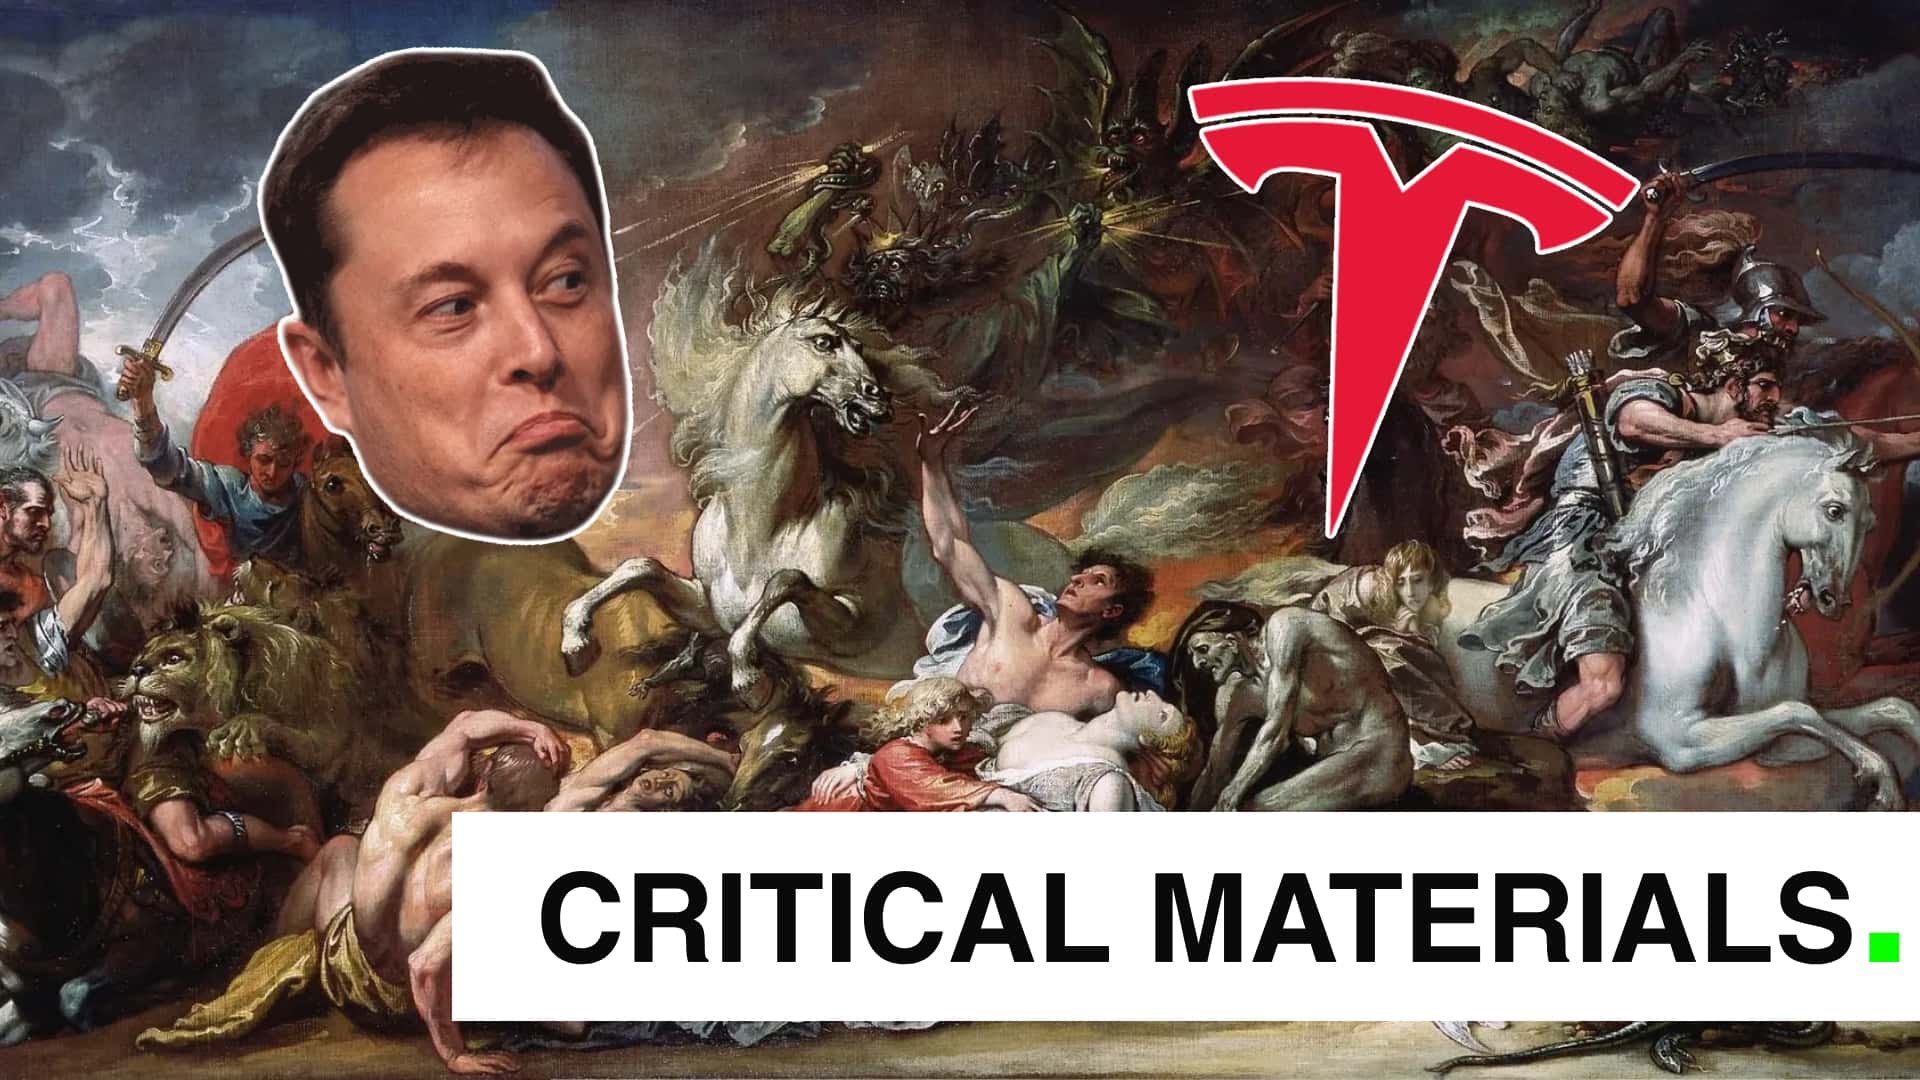 judgment day arrives for elon musk and tesla